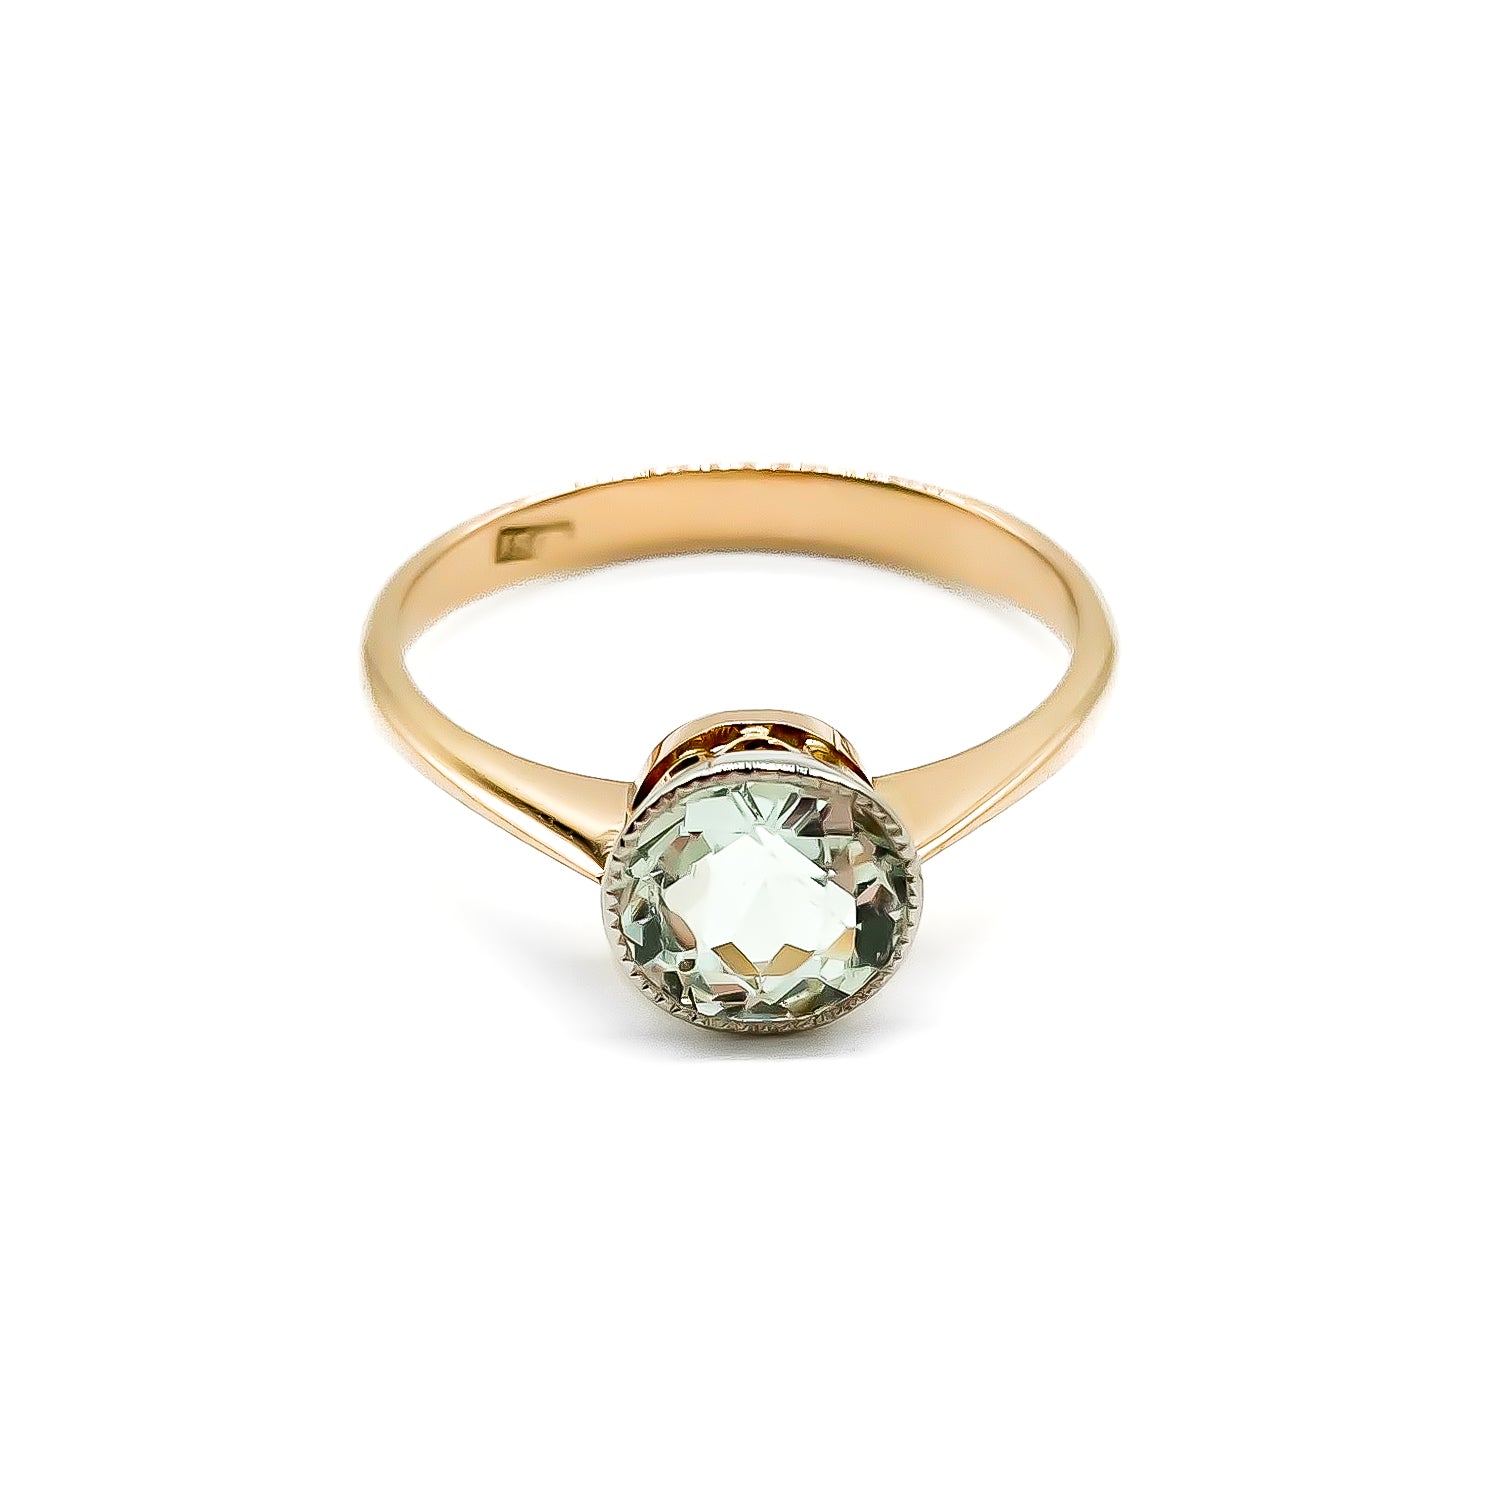 Stunning Edwardian rose gold ring with a round faceted sea blue aquamarine in a white and rose gold setting.